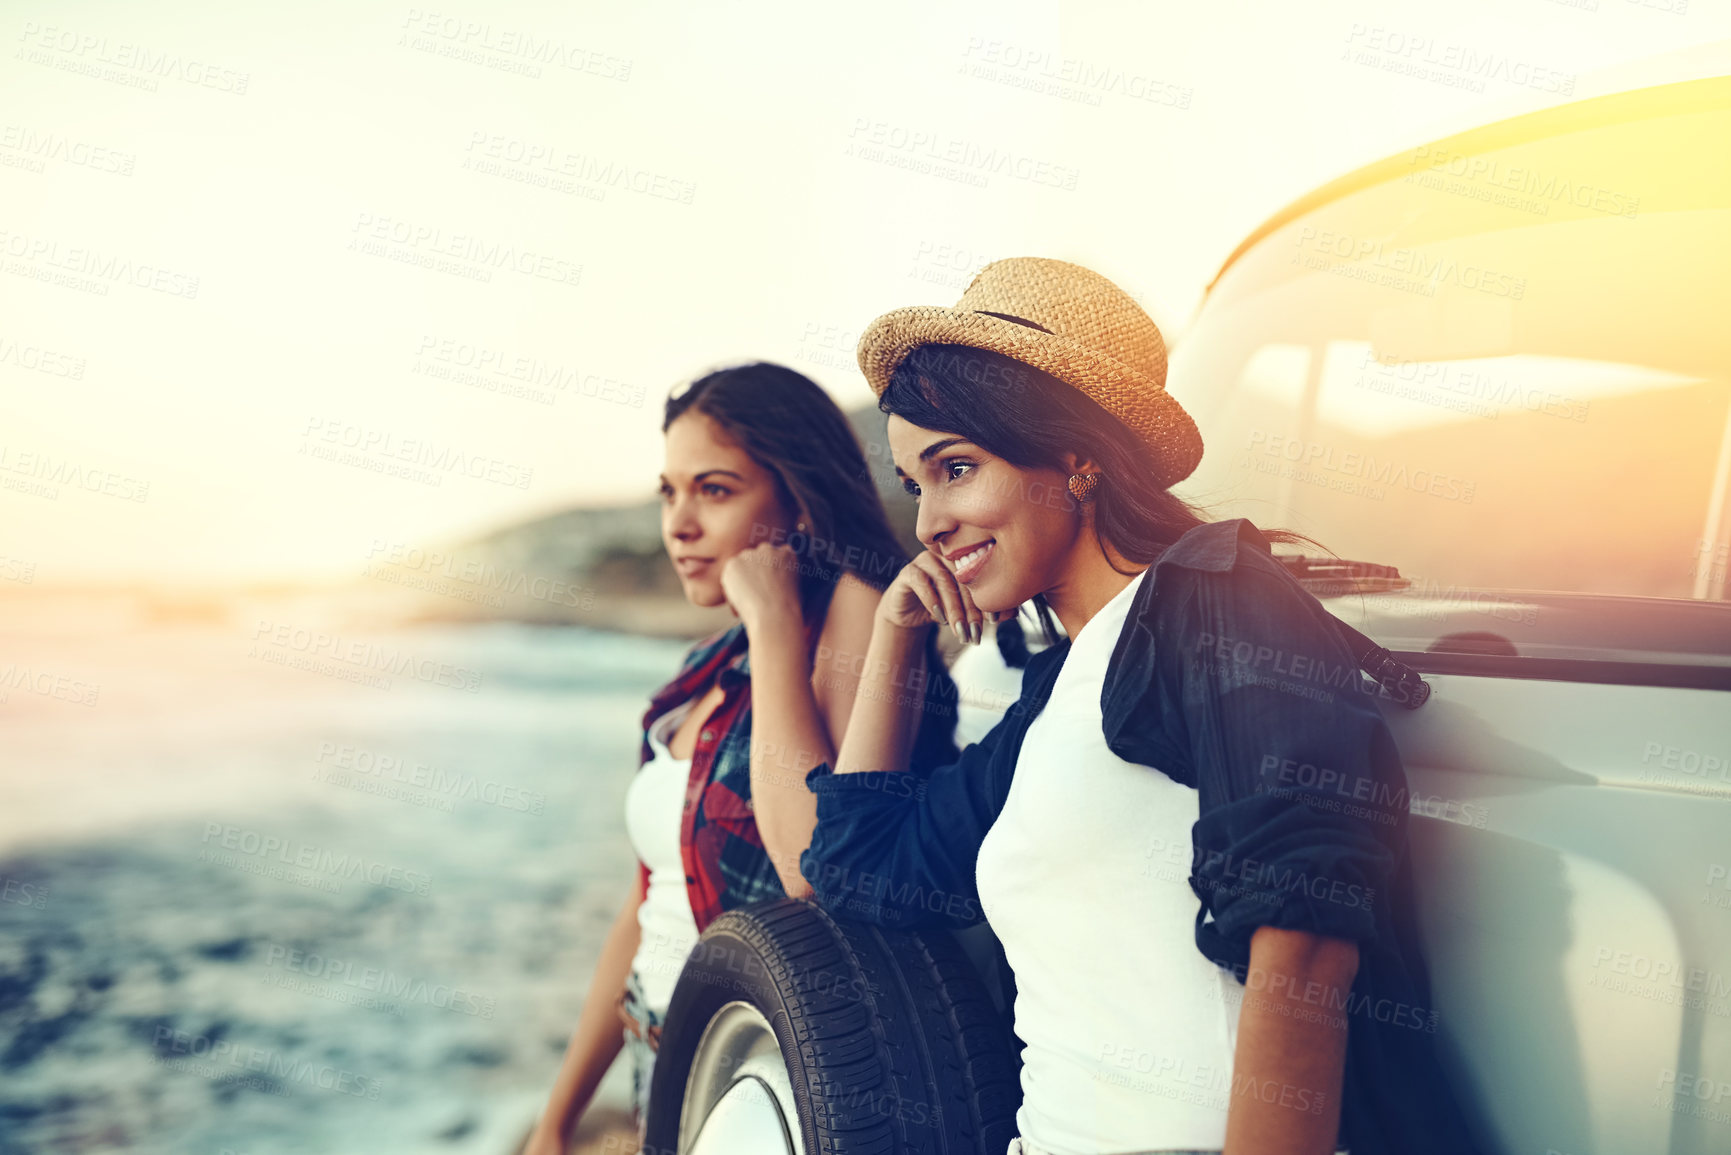 Buy stock photo Shot of two young friends stopping at the beach during their roadtrip